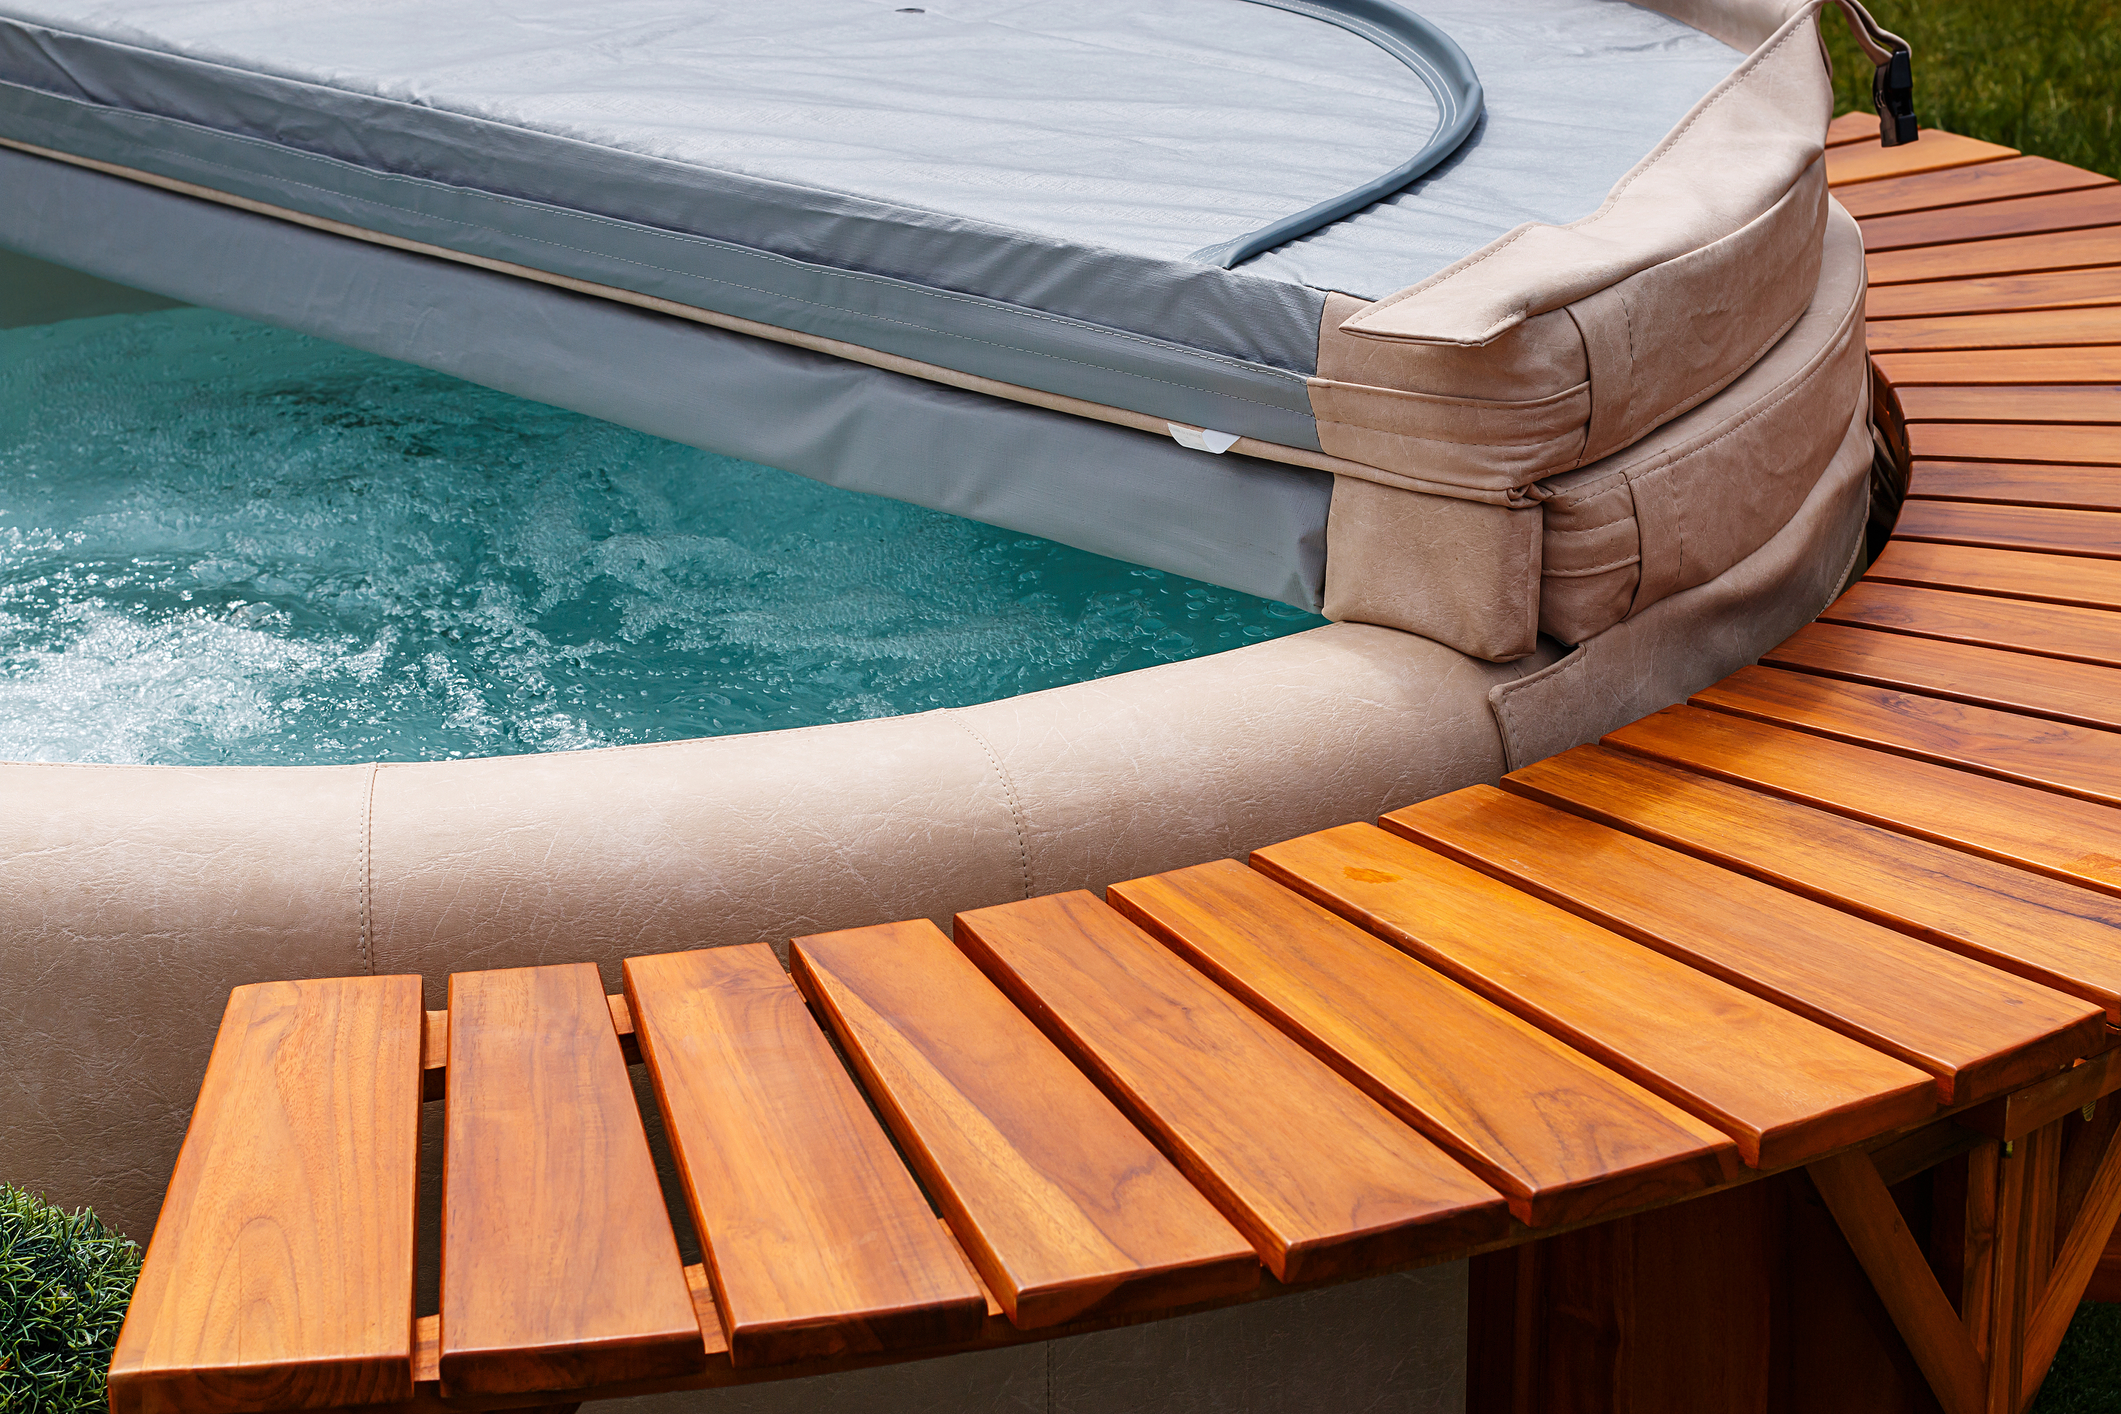 Things To Consider When Purchasing an Inflatable Hot Tub